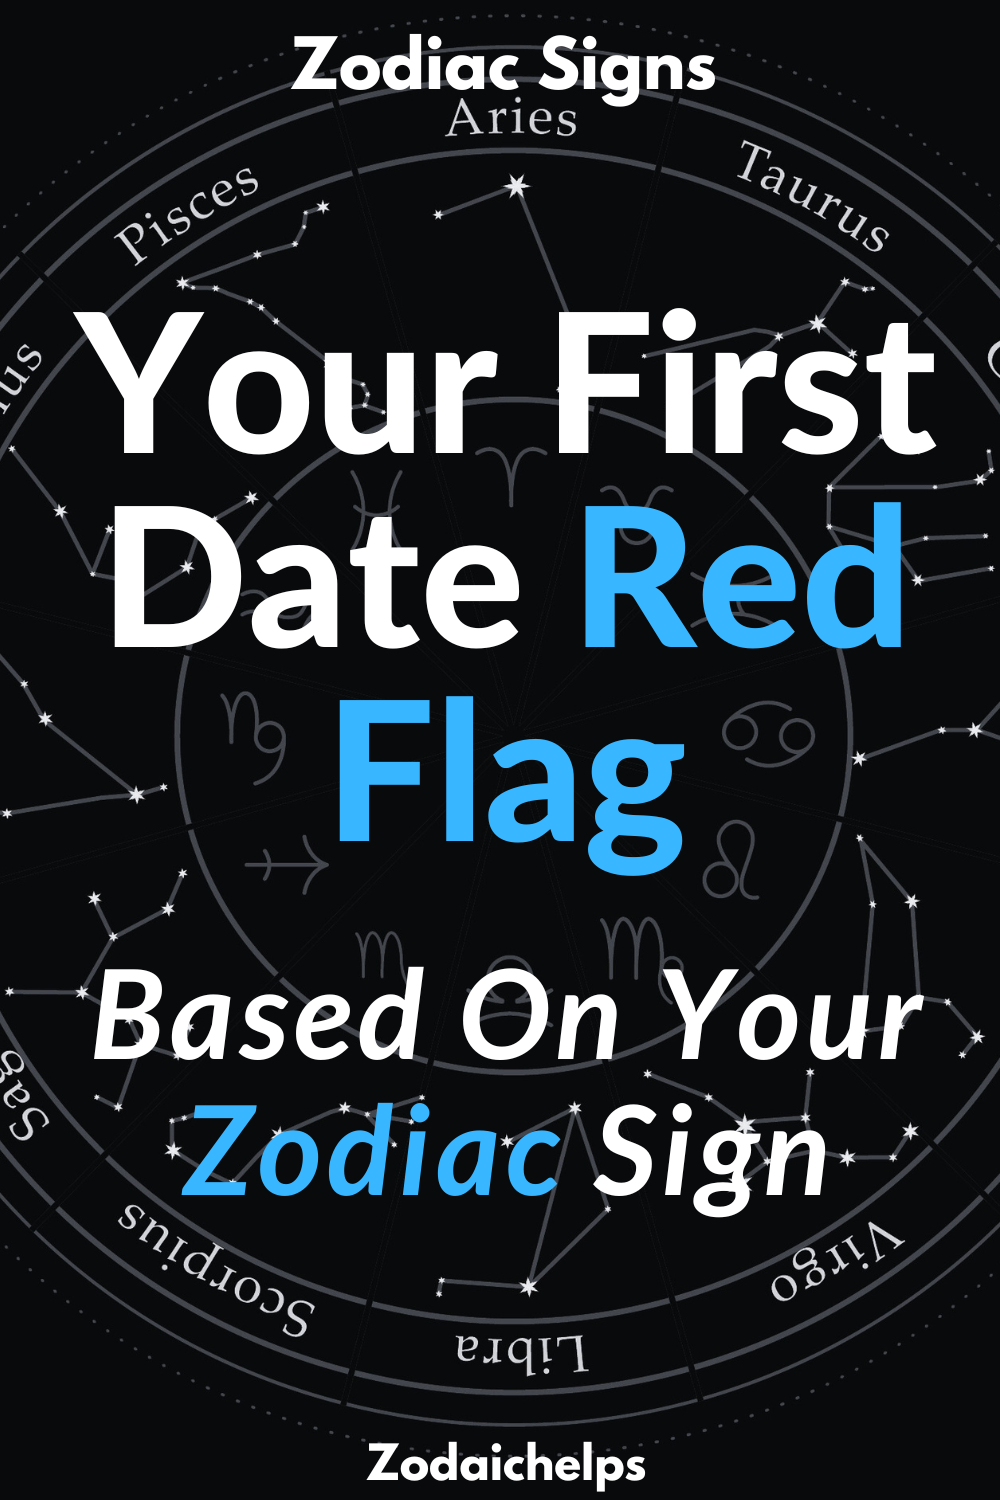 Your First Date Red Flag, Based On Your Zodiac Sign